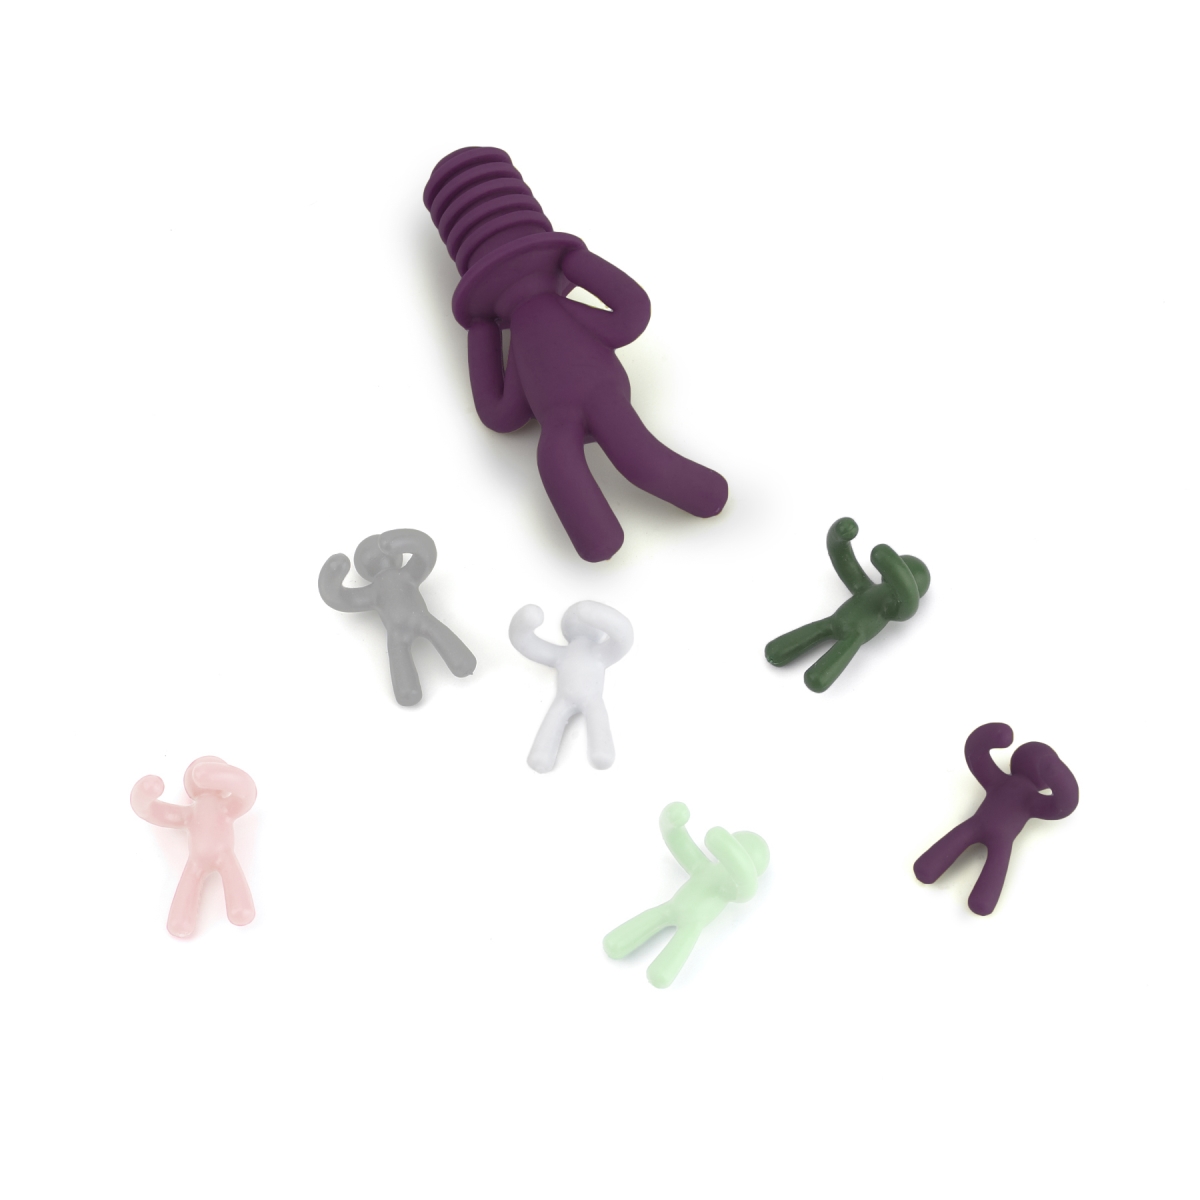 480320-022 0.14 In. Drinking Buddy Wine Bottle Stopper & Charms - Assorted Colors